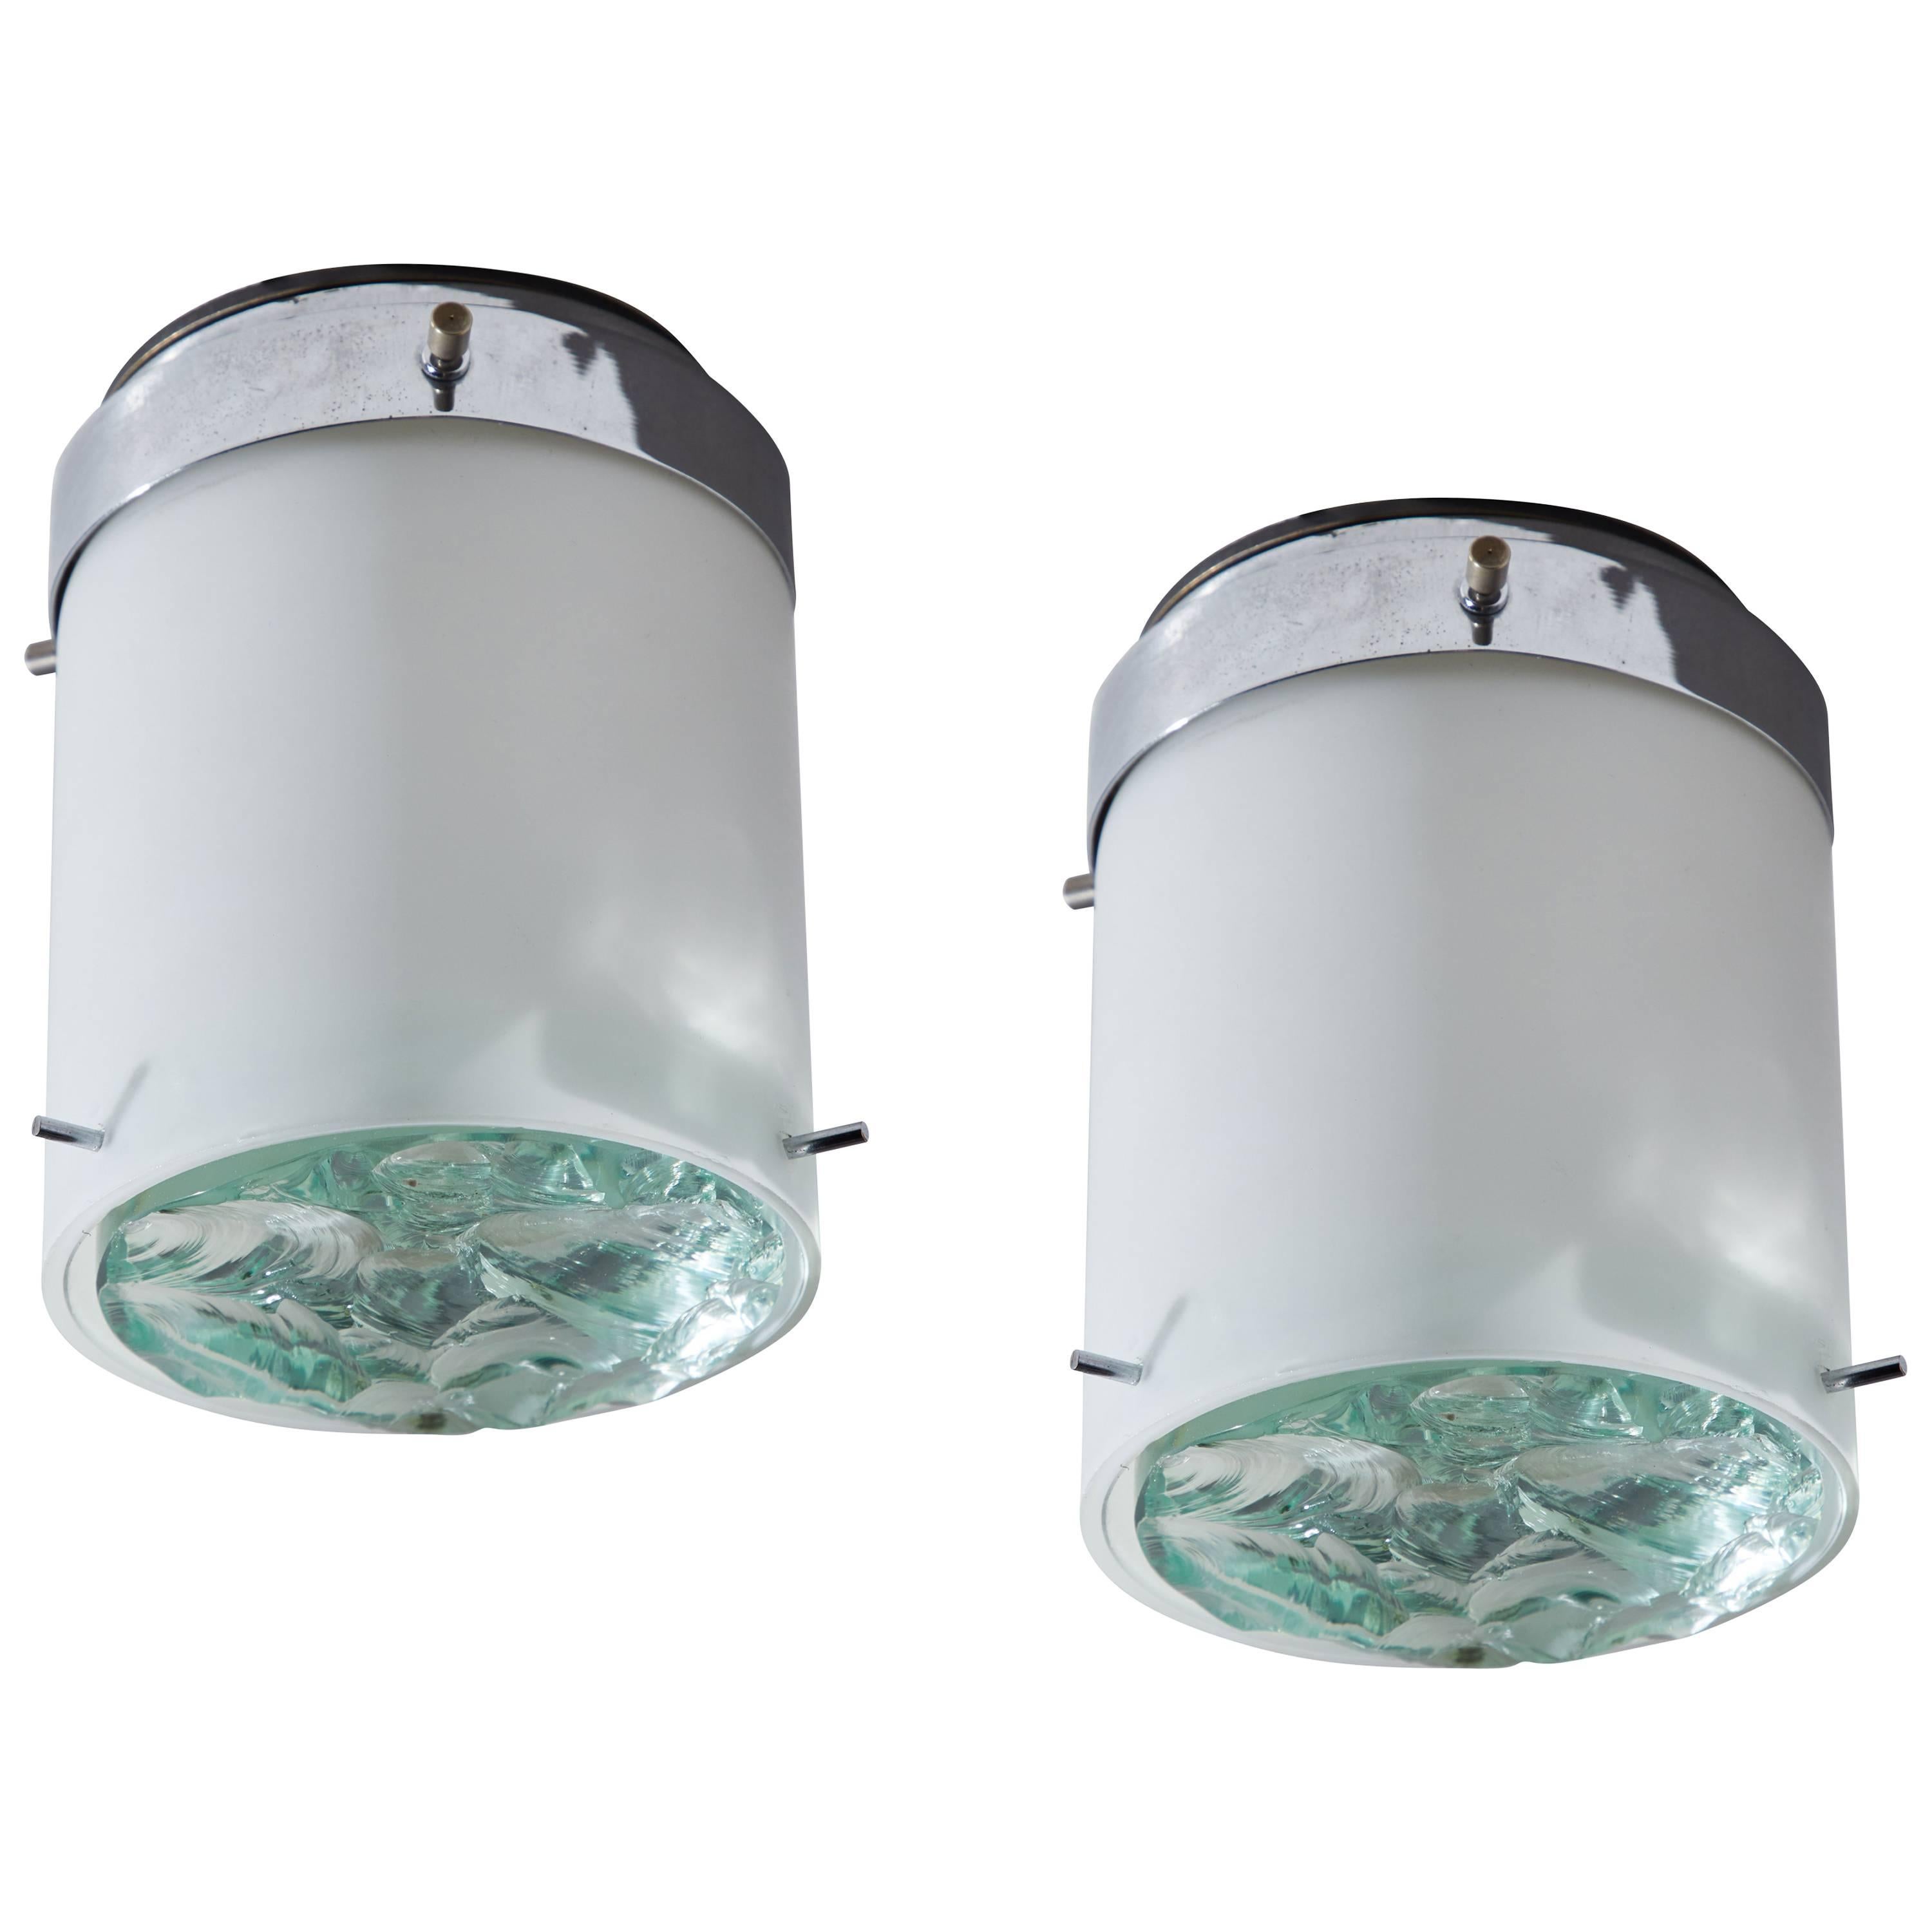 Model 2494 Wall or Ceiling Lights by Max Ingrand for Fontana Arte